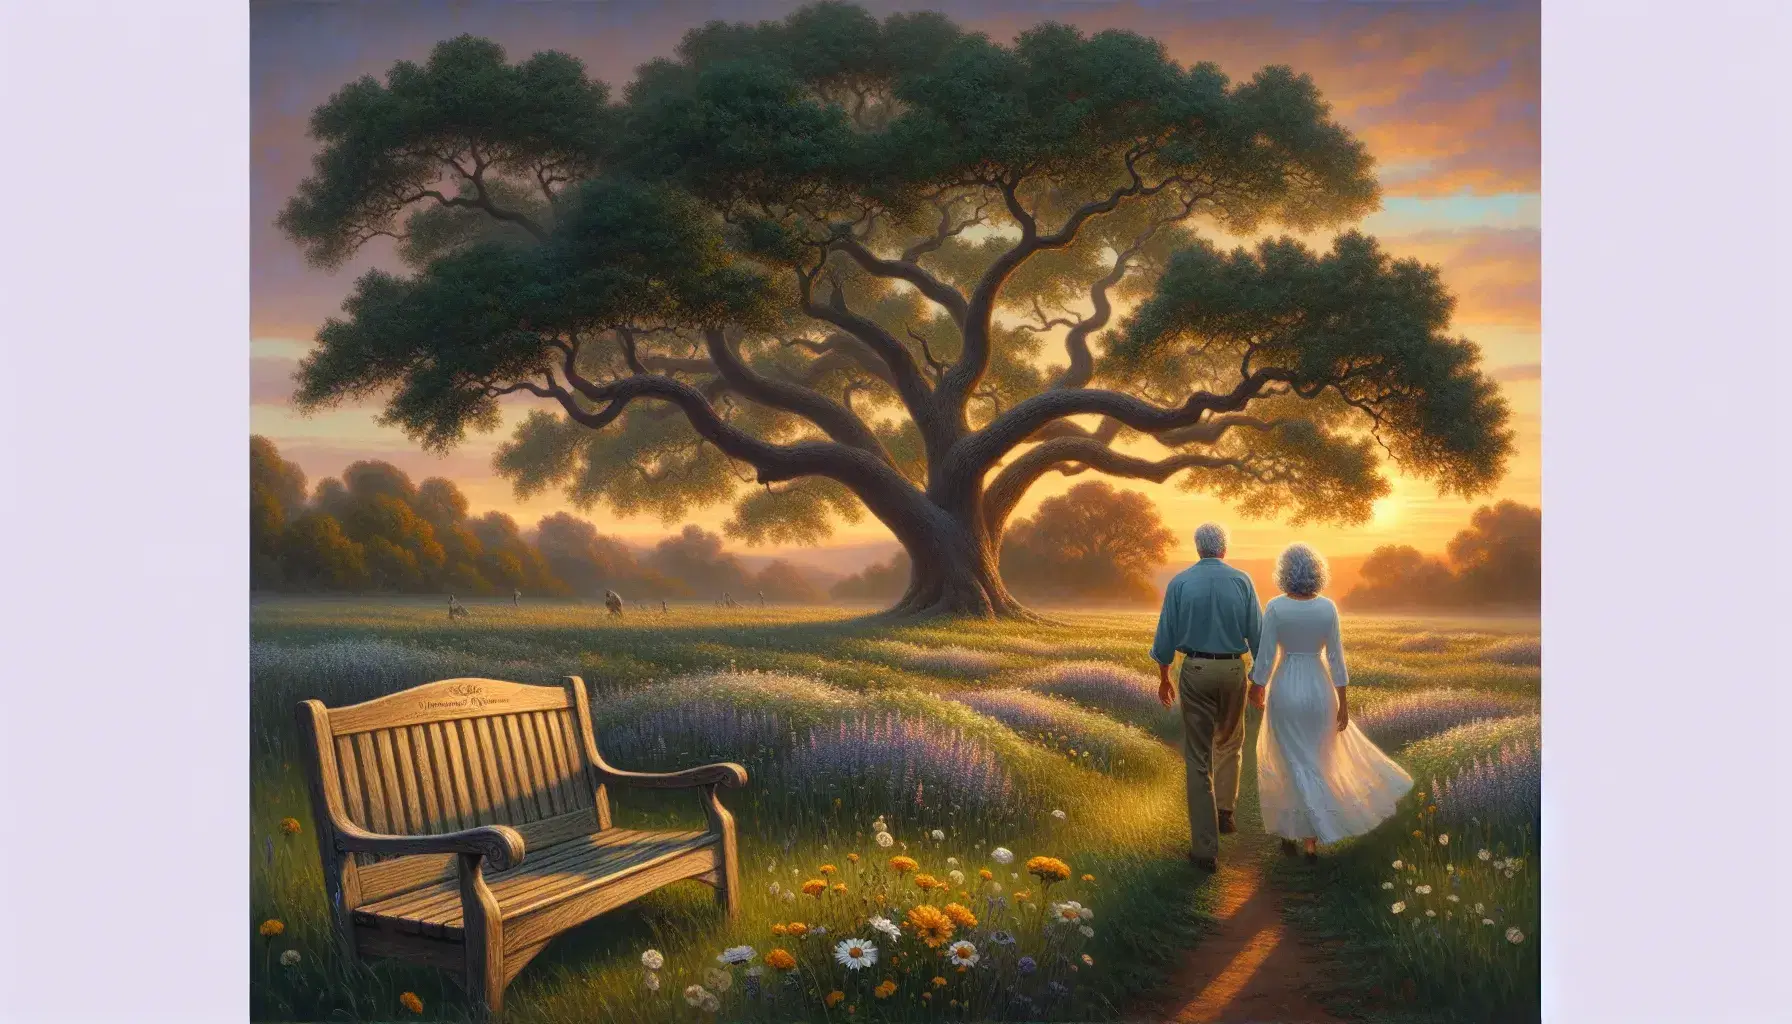 Serene sunset scene with an aged wooden bench overlooking a meadow of wildflowers, a mature couple walking hand-in-hand, and a solitary oak tree.